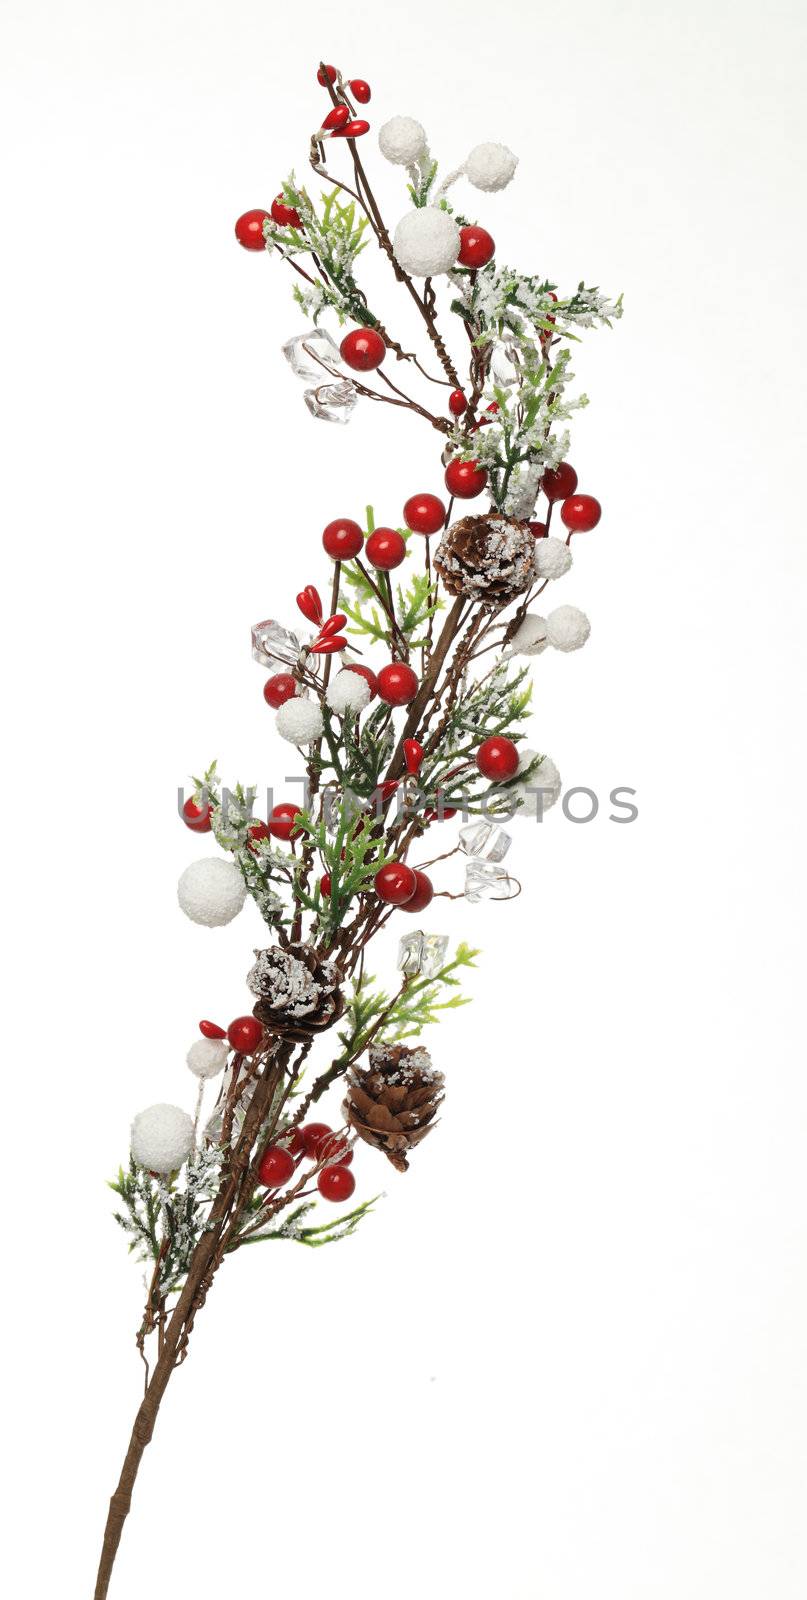 Image of a winter decorated little branch against a white background. Such decoration is used during the Saint Nicholas day and night in December in some parts of the world.